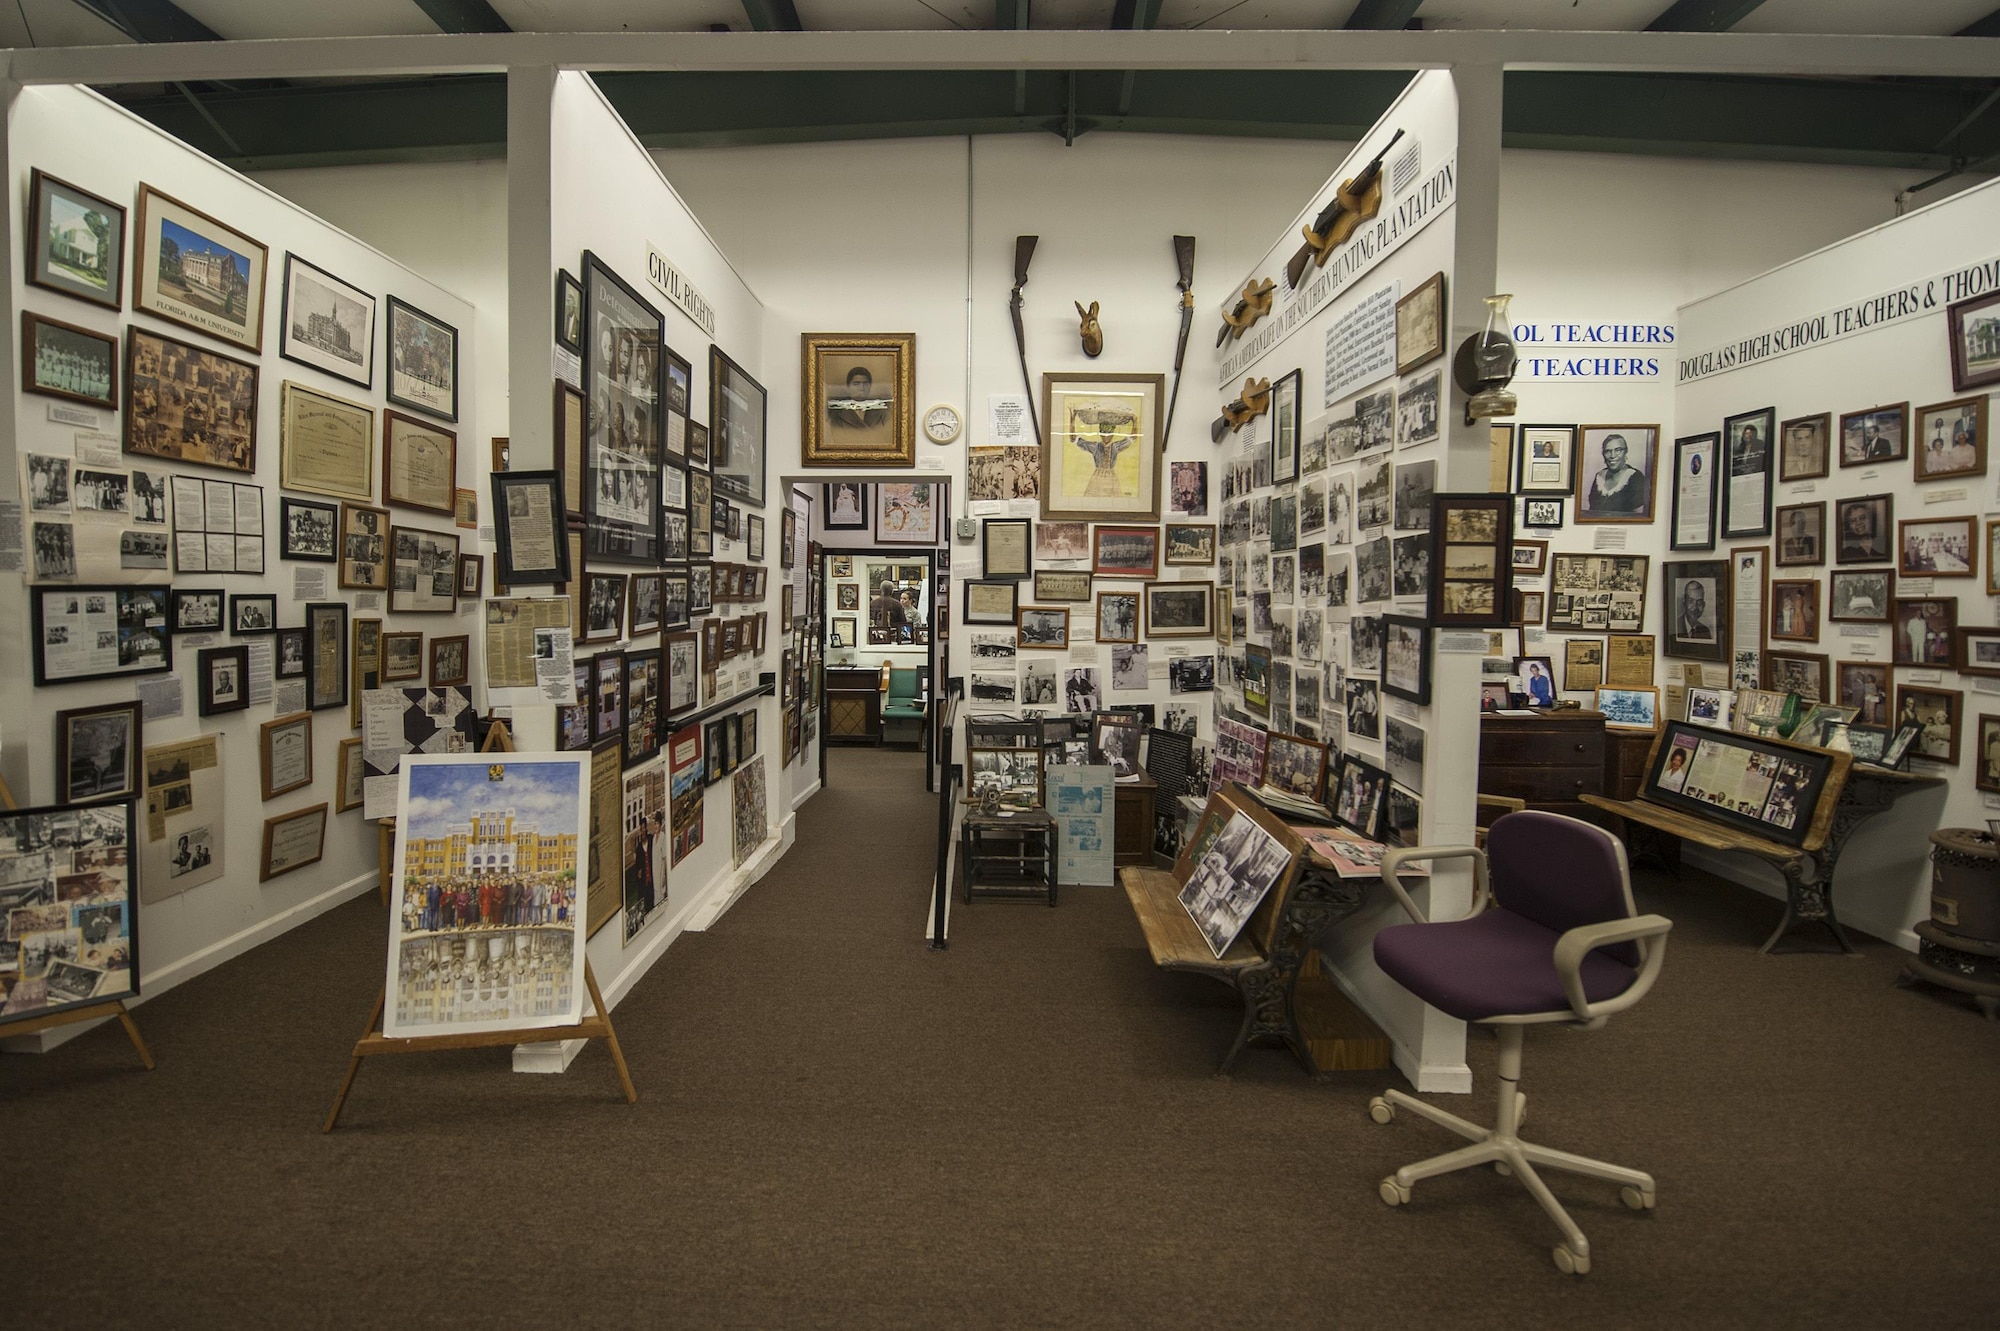 Artifacts from various periods in black history are displayed Feb. 8, 2016, at the Jack Hadley Black History Museum in Thomasville, Ga. The museum contains thousands of items dating back to the early 1800’s highlighting achievements and efforts made by black people within the local and national community. (U.S. Air Force photo/Airman 1st Class Janiqua P. Robinson)